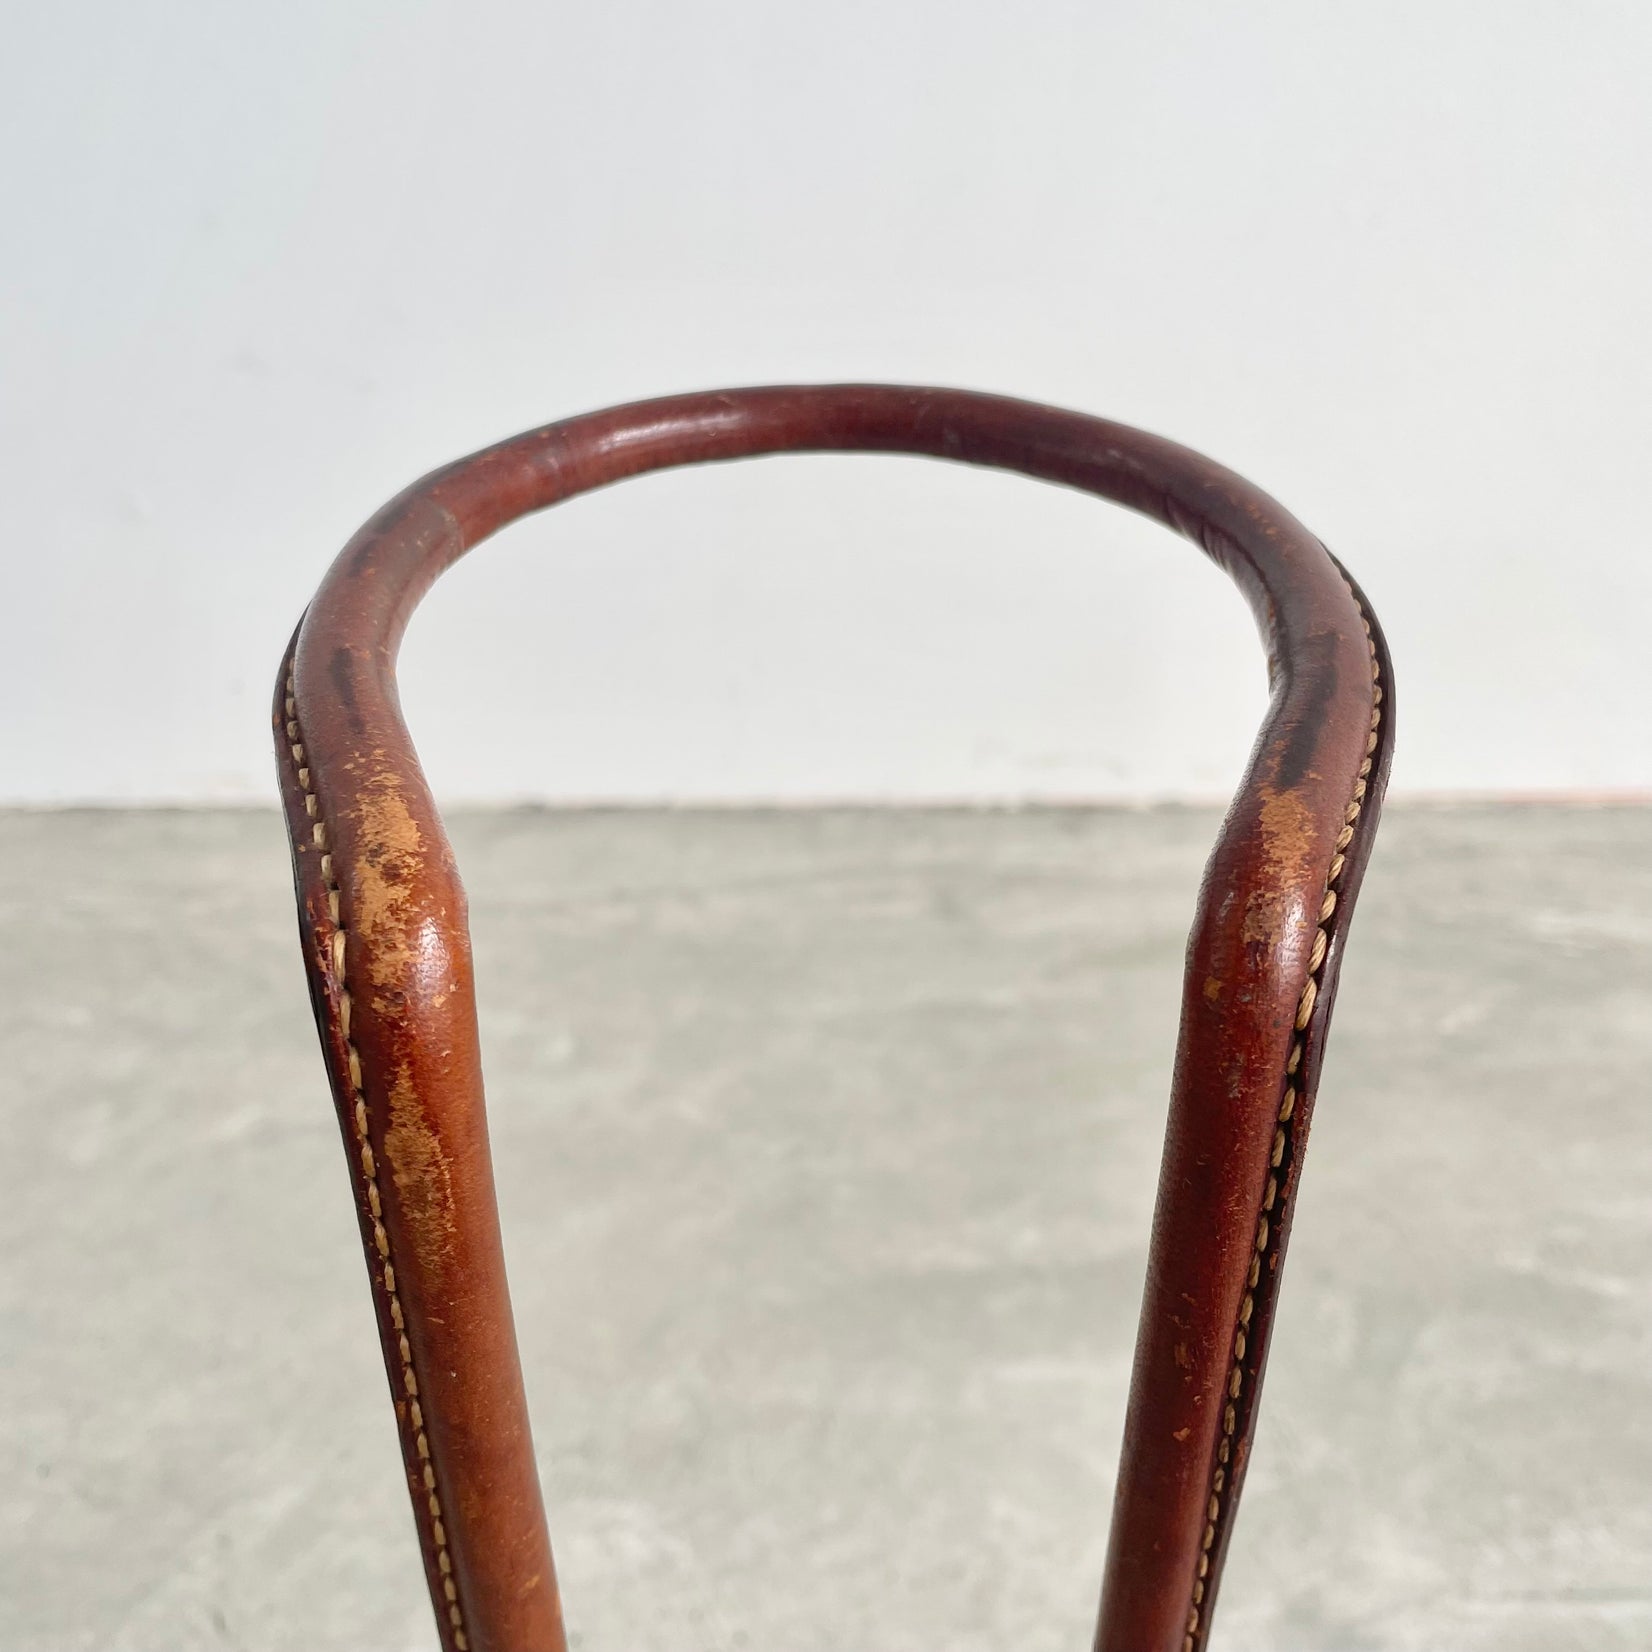 Jacques Adnet Leather Umbrella Stand, 1950s France